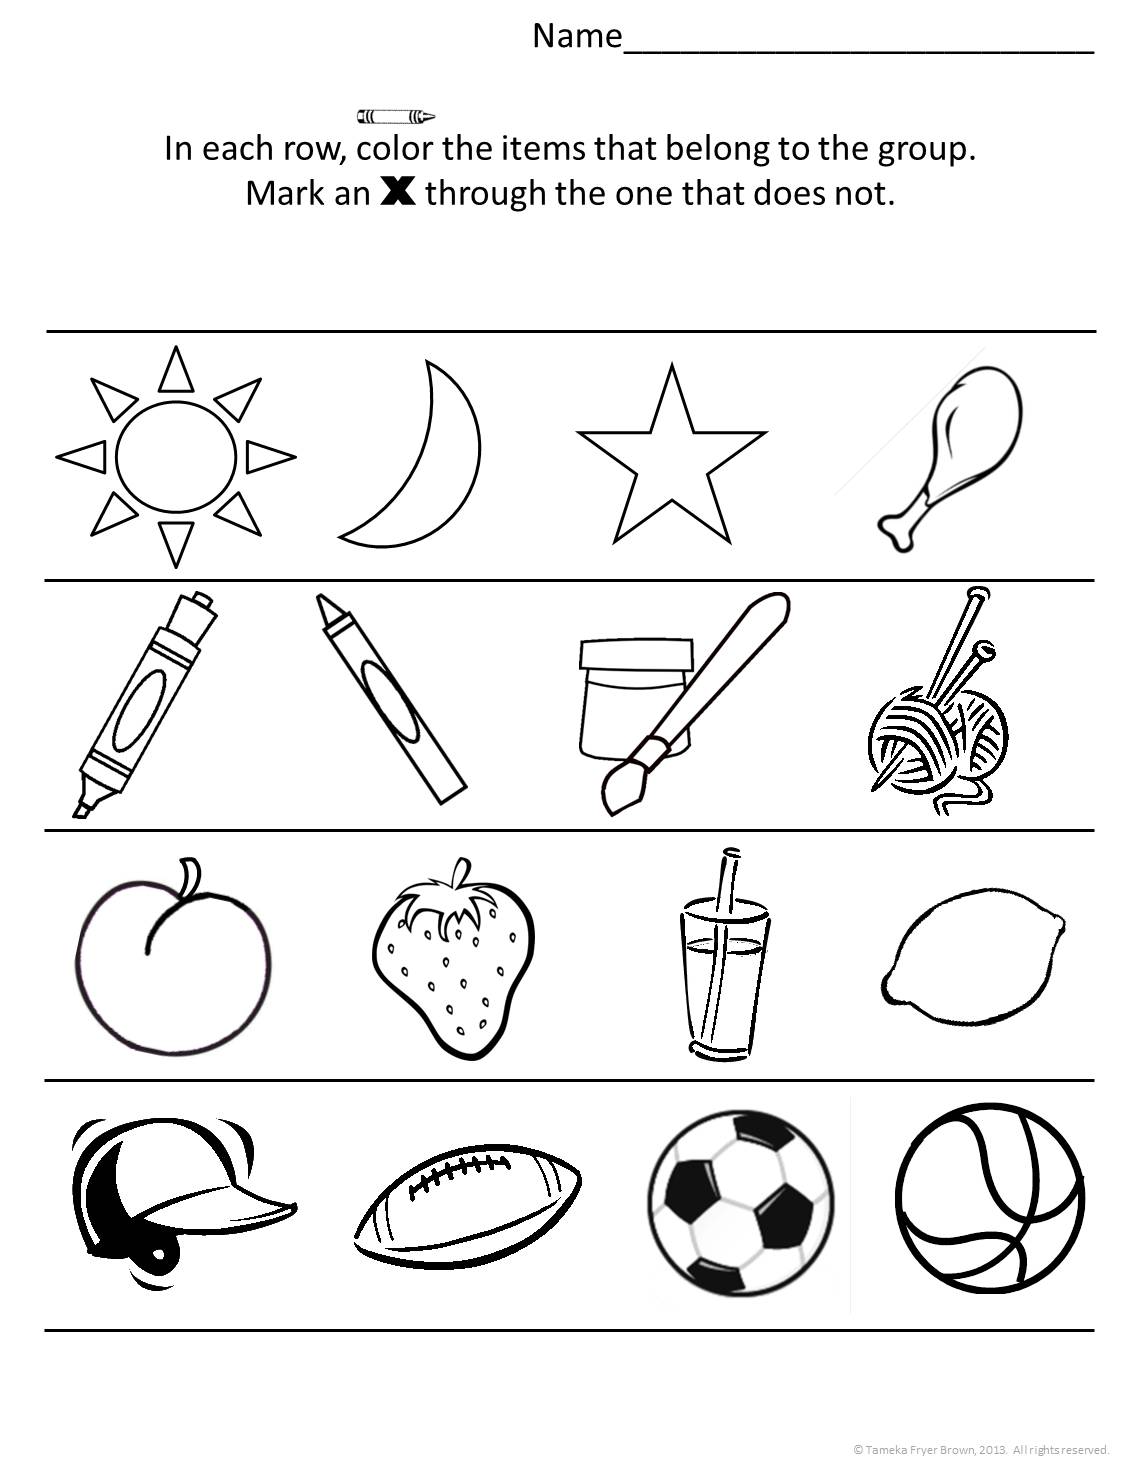 10-best-images-of-what-shape-does-not-belong-worksheet-what-does-not-belong-worksheets